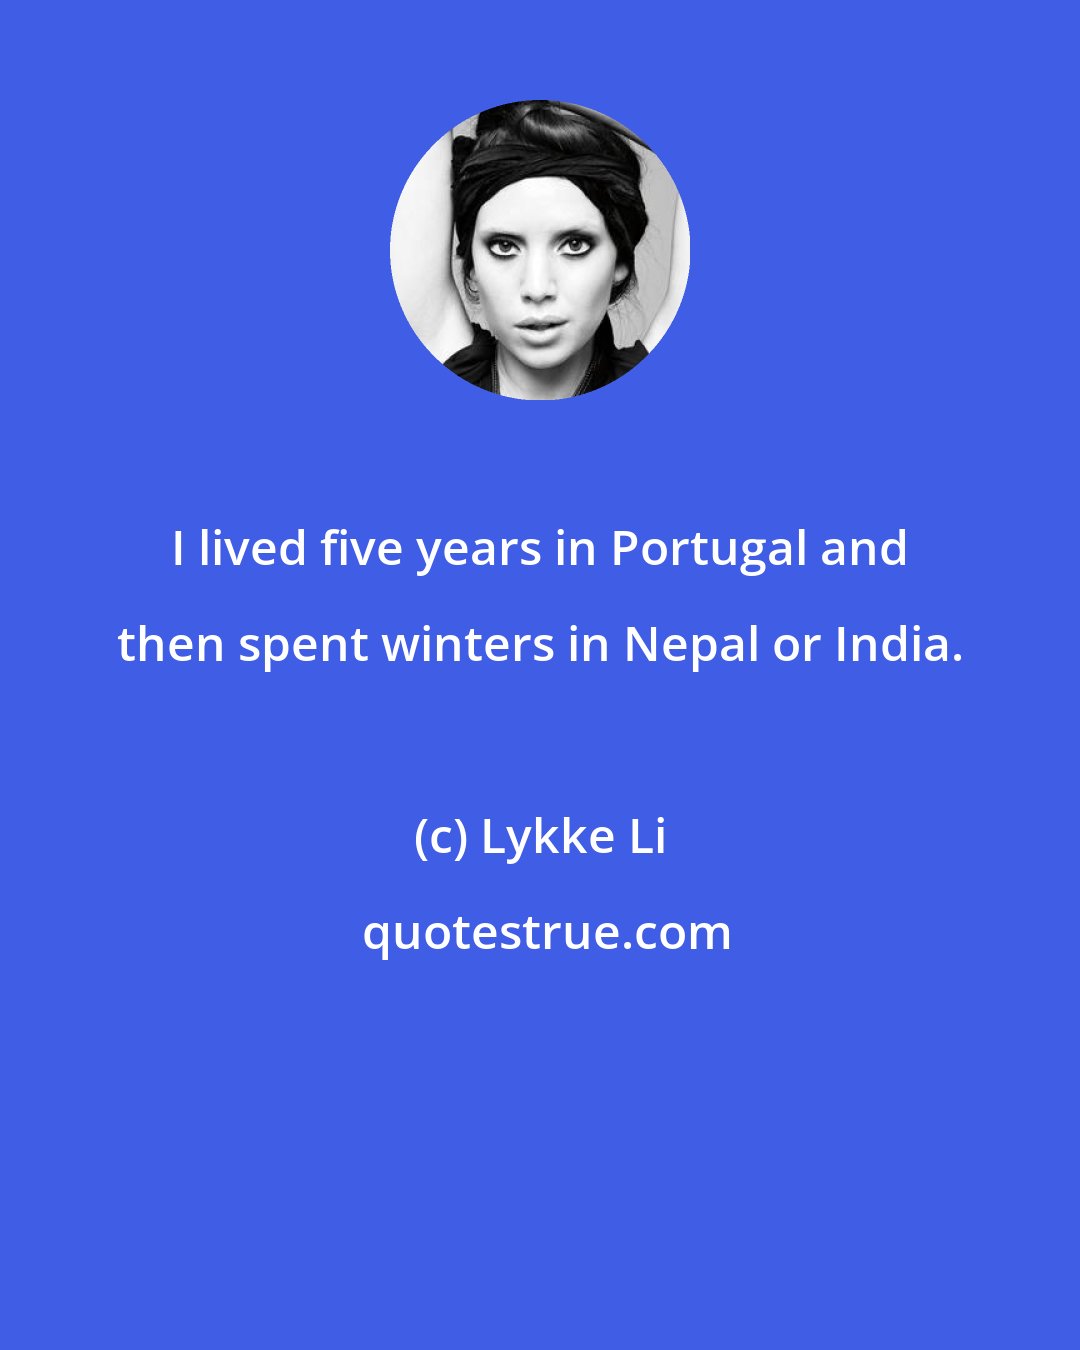 Lykke Li: I lived five years in Portugal and then spent winters in Nepal or India.